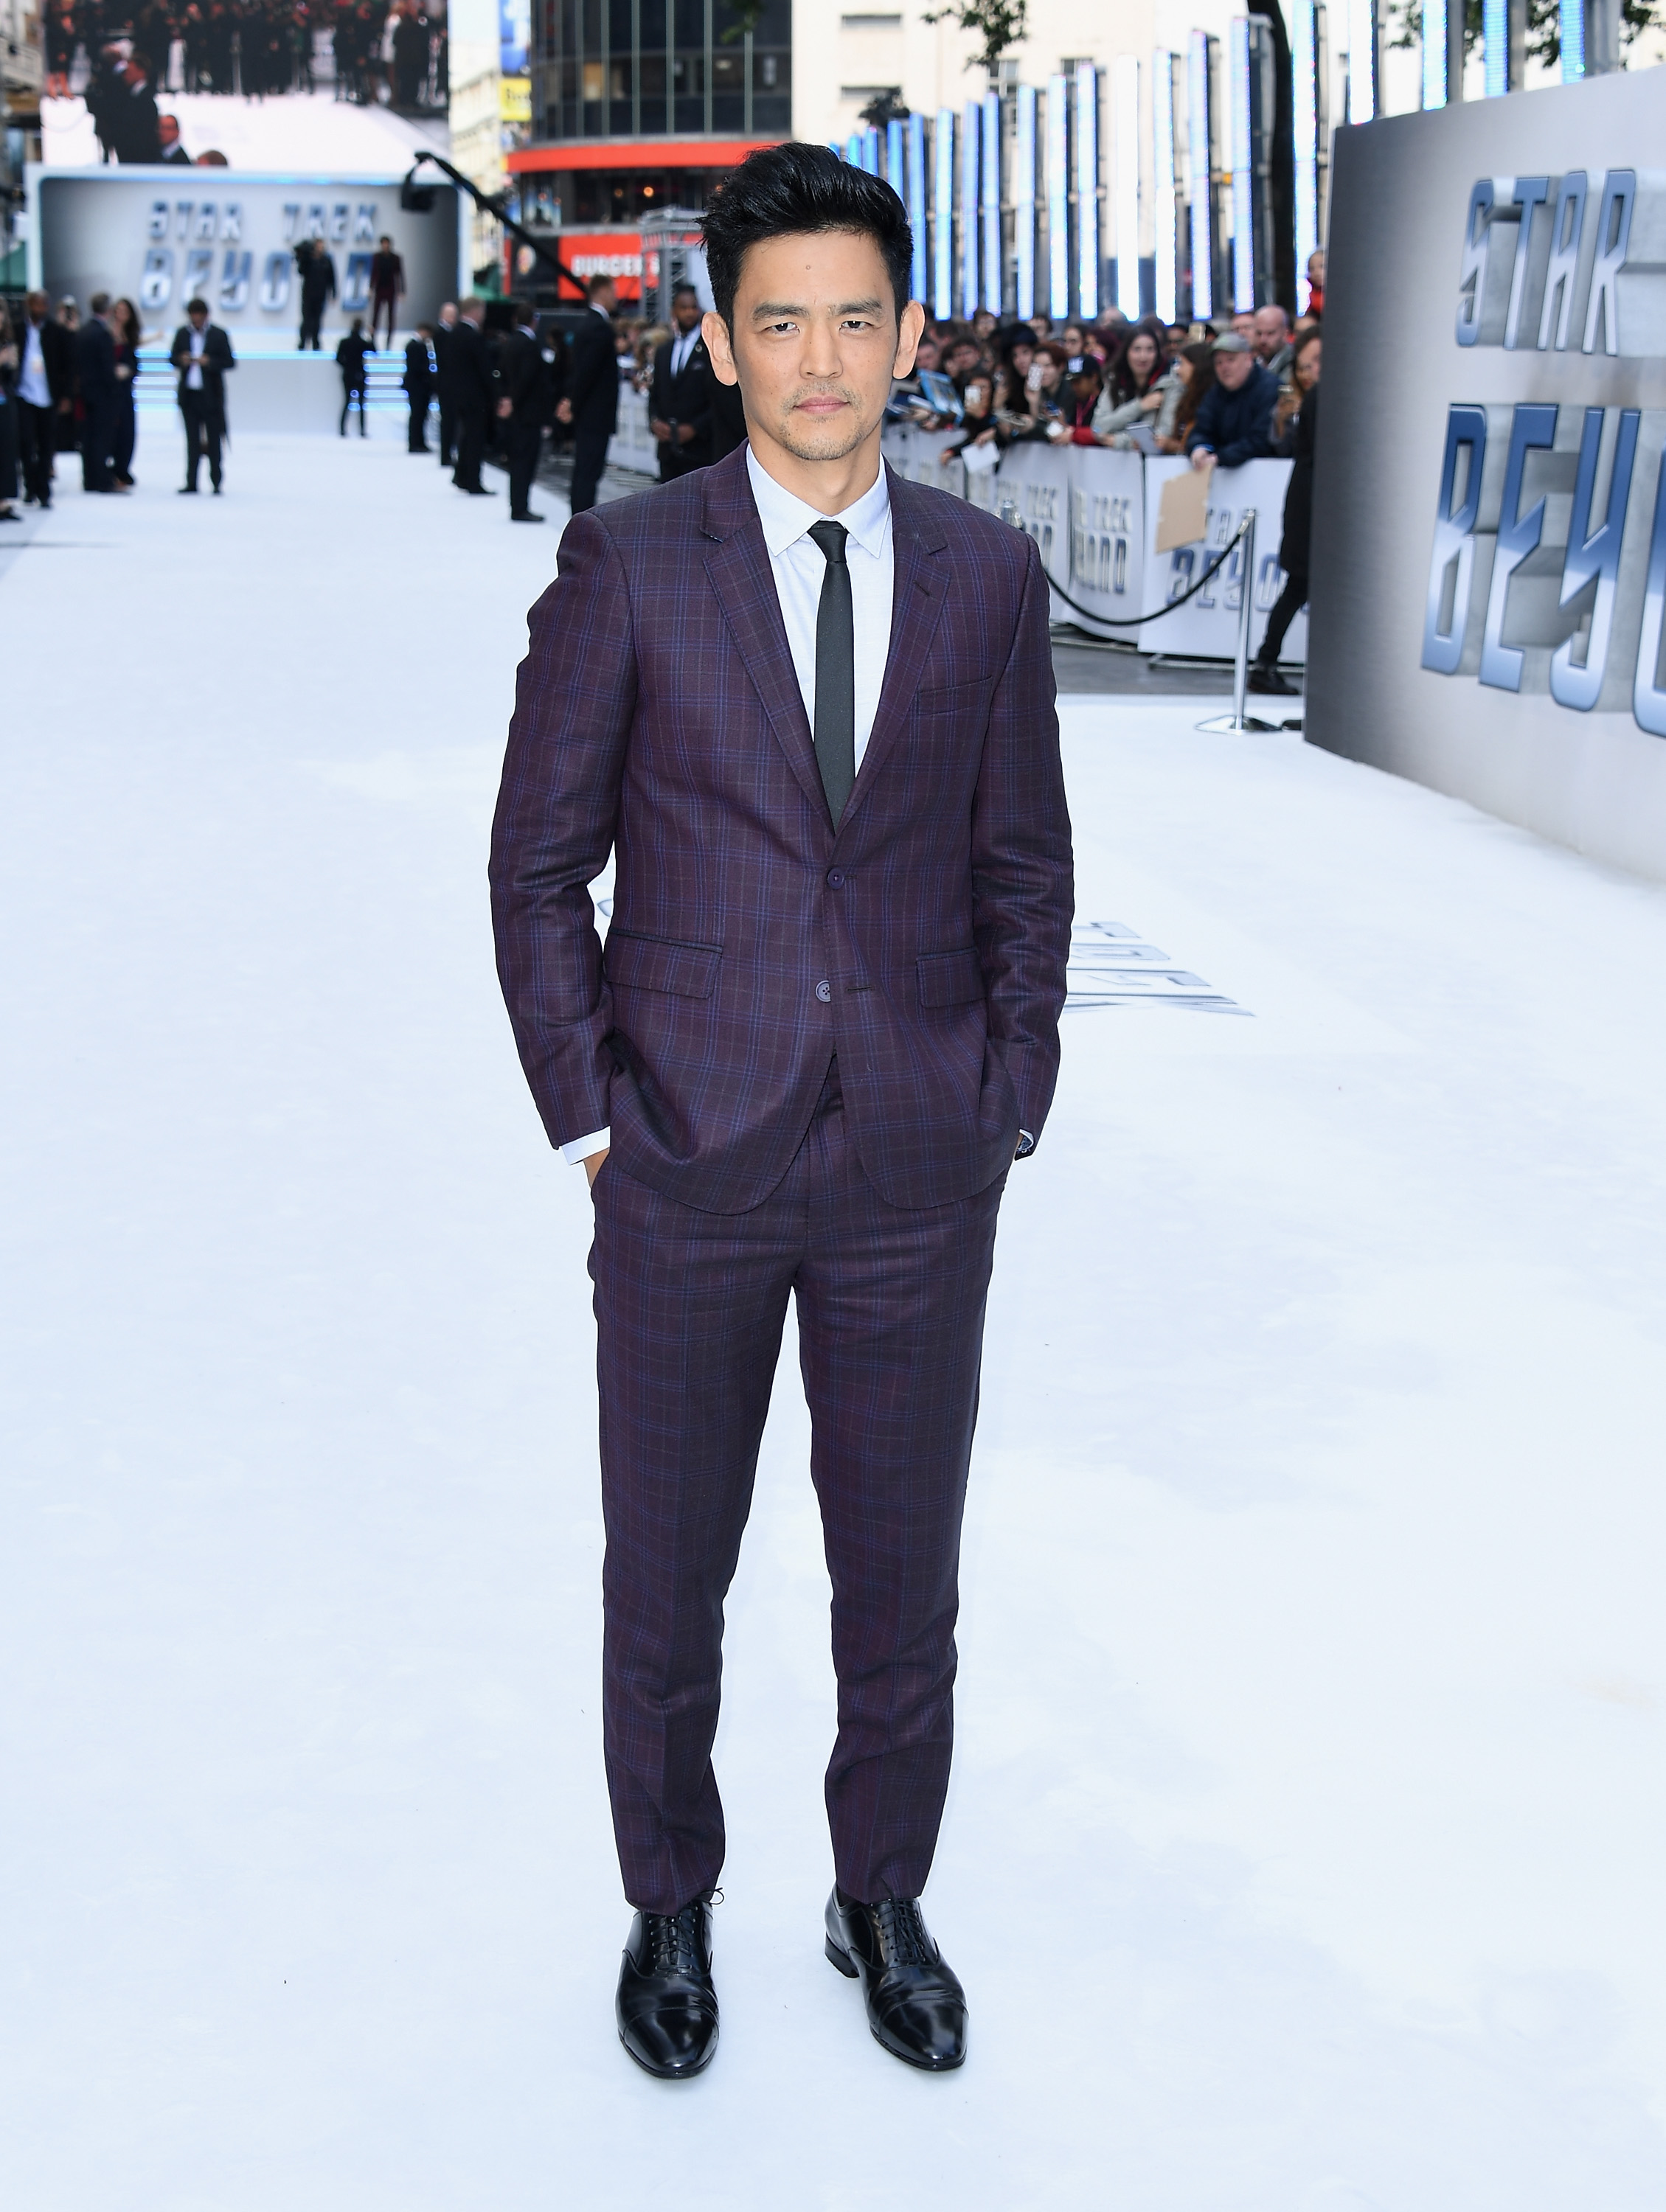  LONDON, ENGLAND - JULY 12: John Cho attends the UK Premiere of Paramount Pictures "Star Trek Beyond" at the Empire Leicester Square on July 12, 2016 in London, England. (Photo by Gareth Cattermole/Getty Images for Paramount Pictures) *** Local Capti